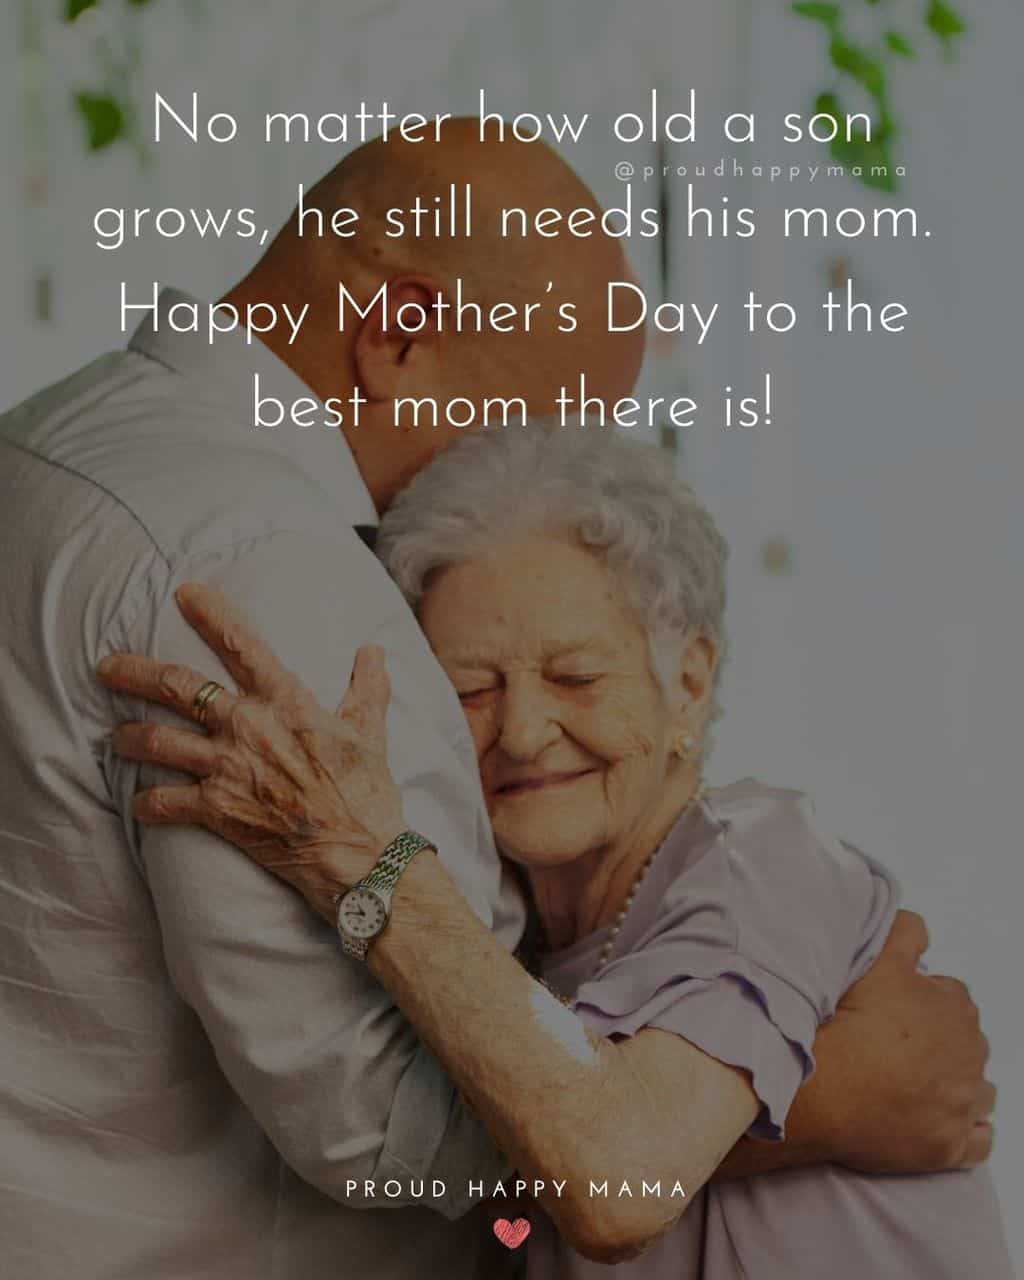 Happy Mothers Day Quotes From Son - No matter how old a son grows, he still needs his mom. Happy Mother’s Day to the best